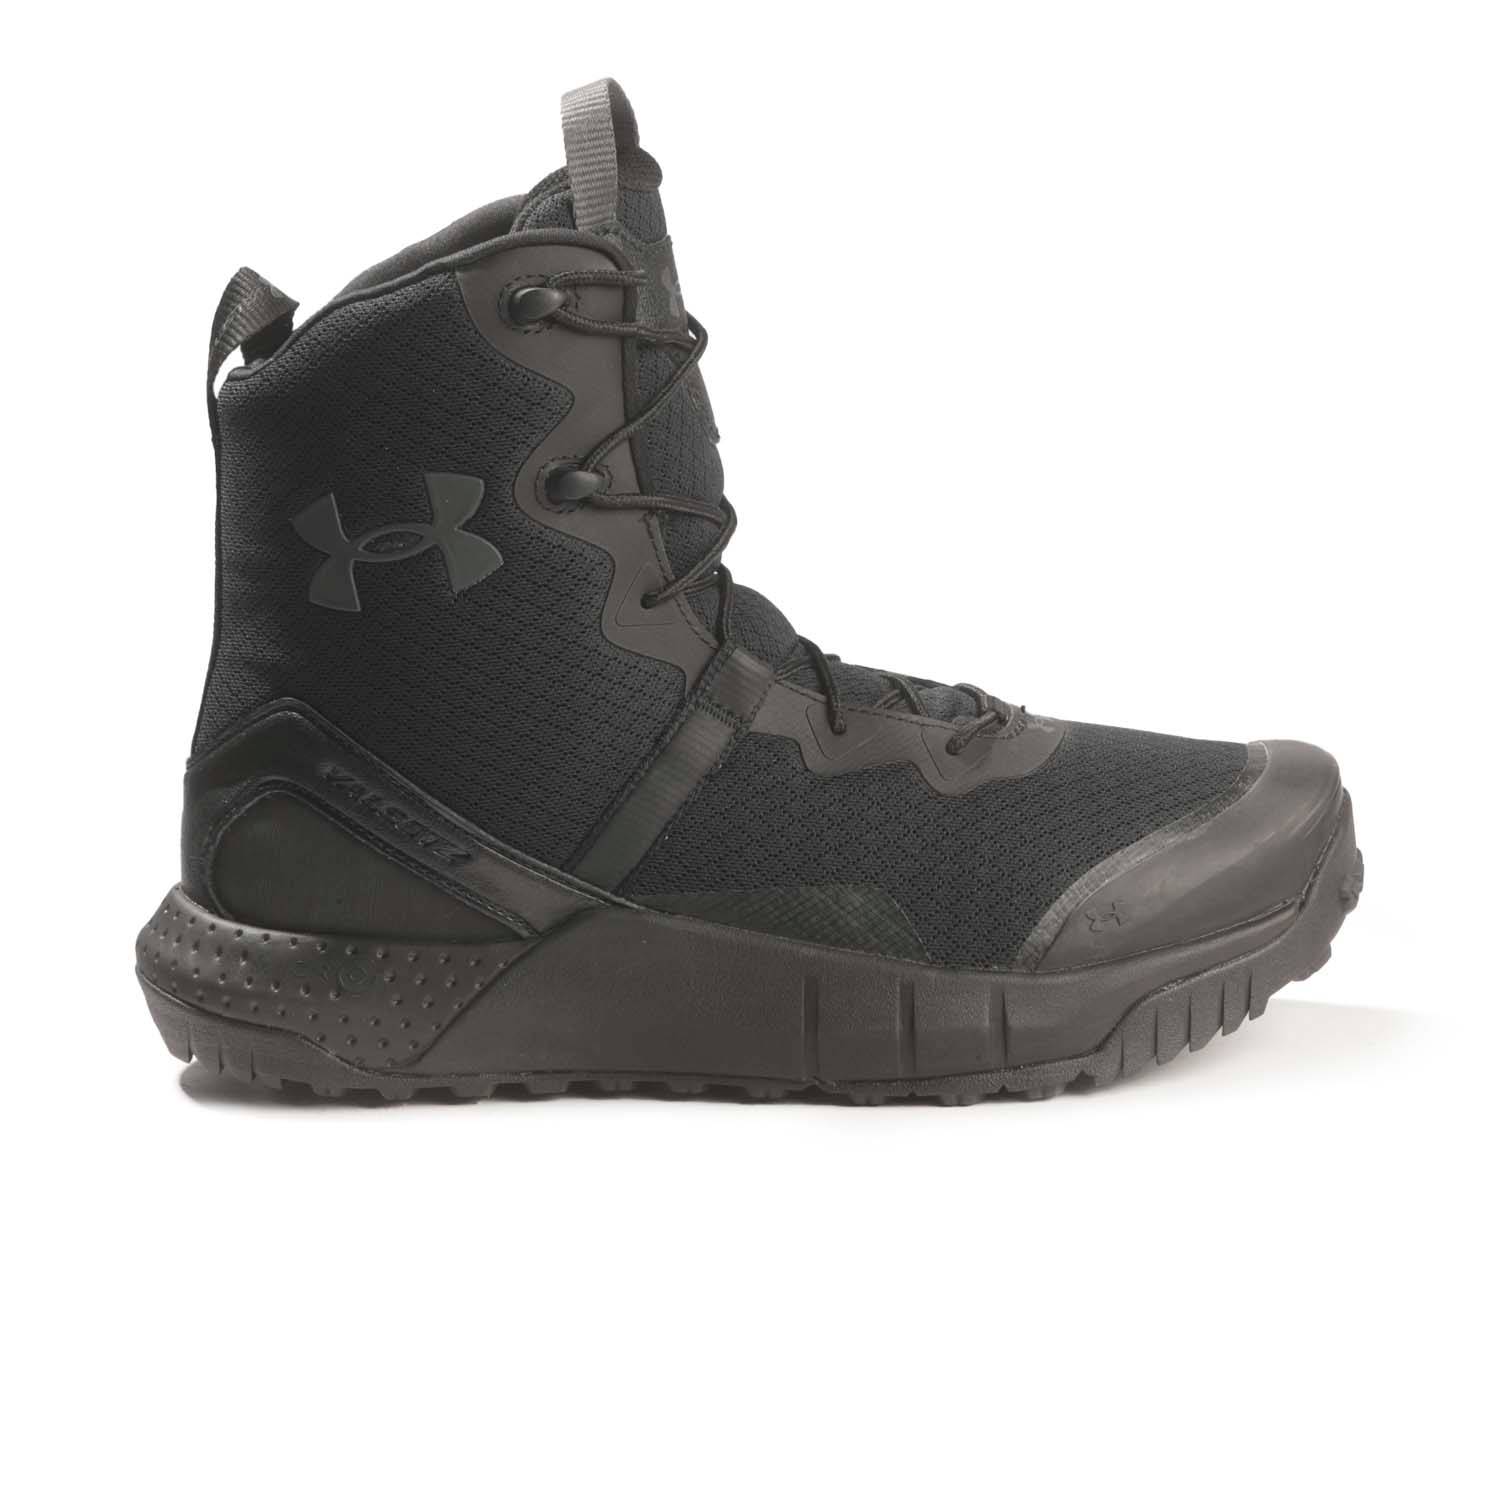 How the UNDER ARMOUR Valsetz Boots Make You a Better Tactical Pro